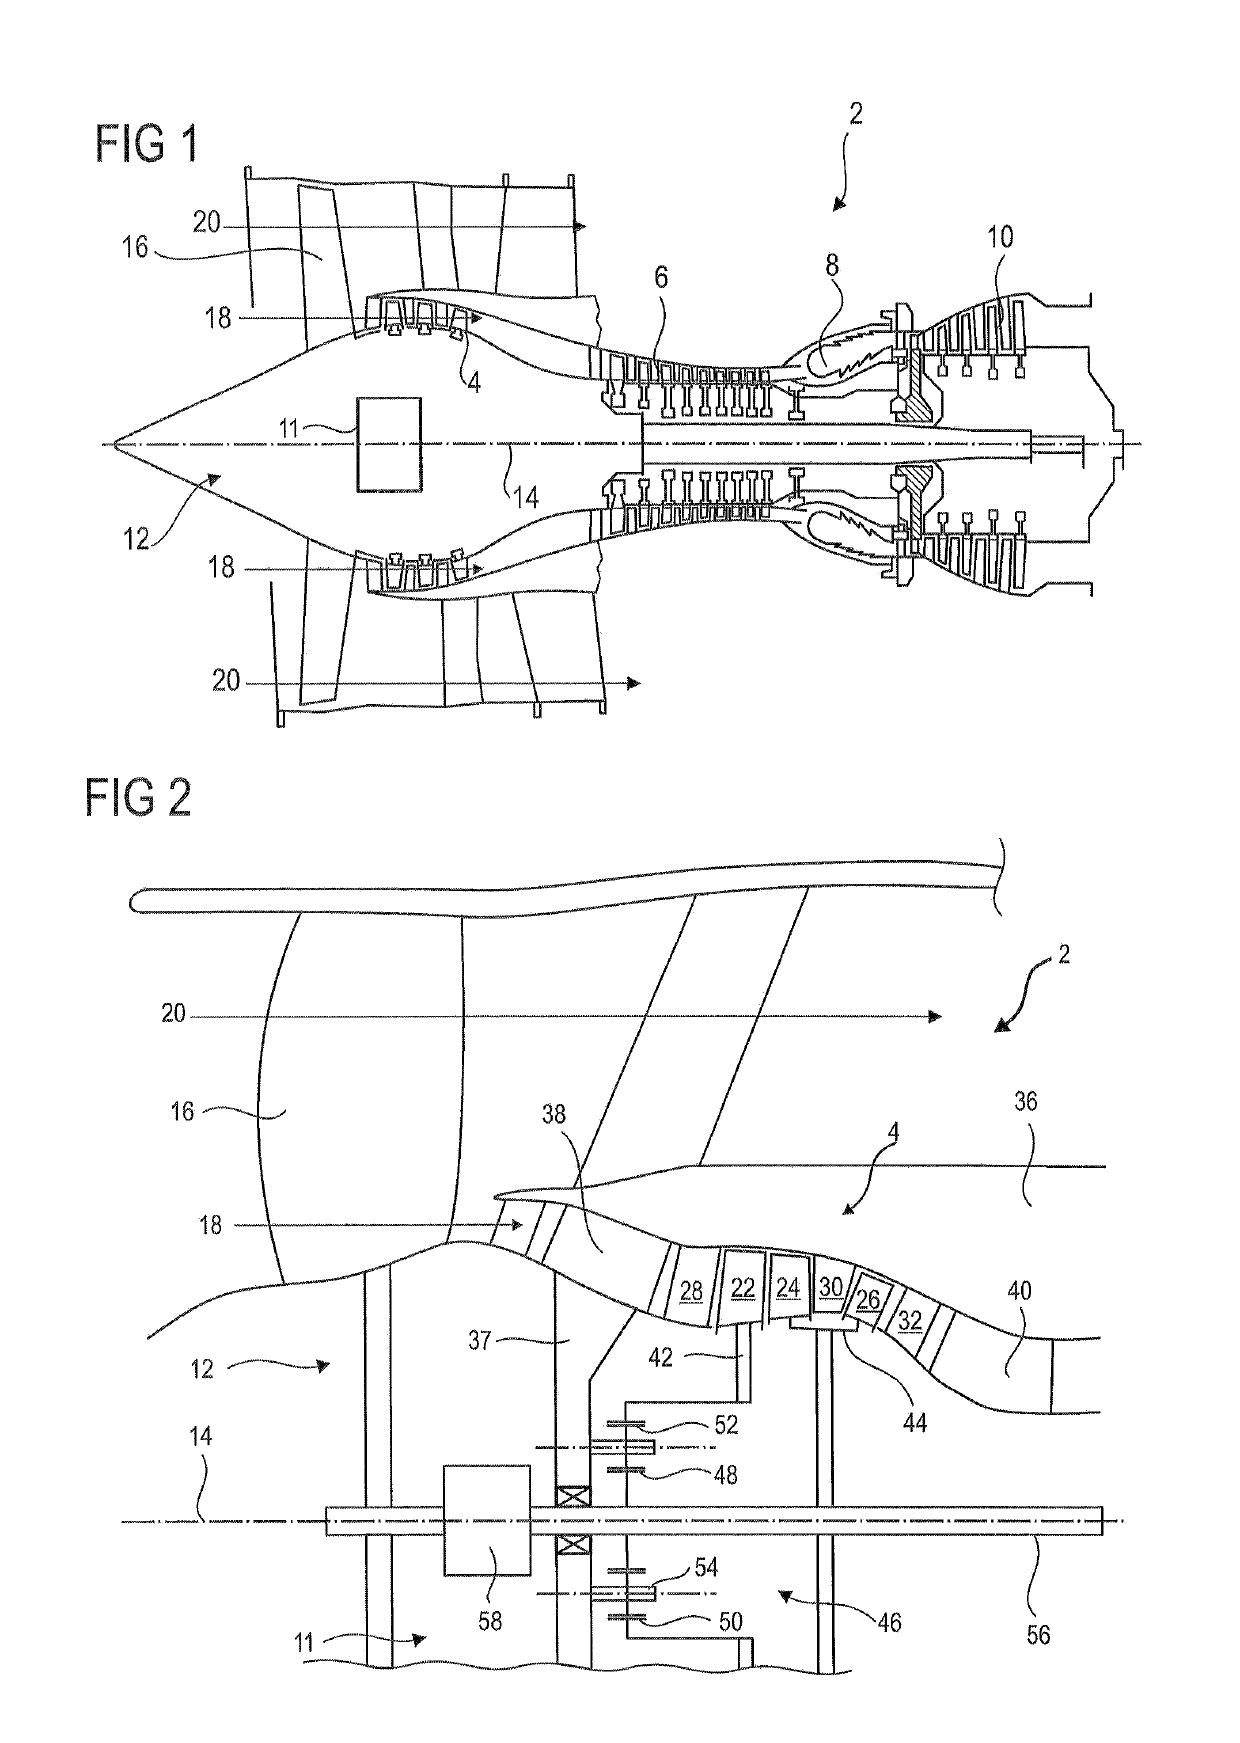 Compressor of axial turbine engine with contra-rotating rotor